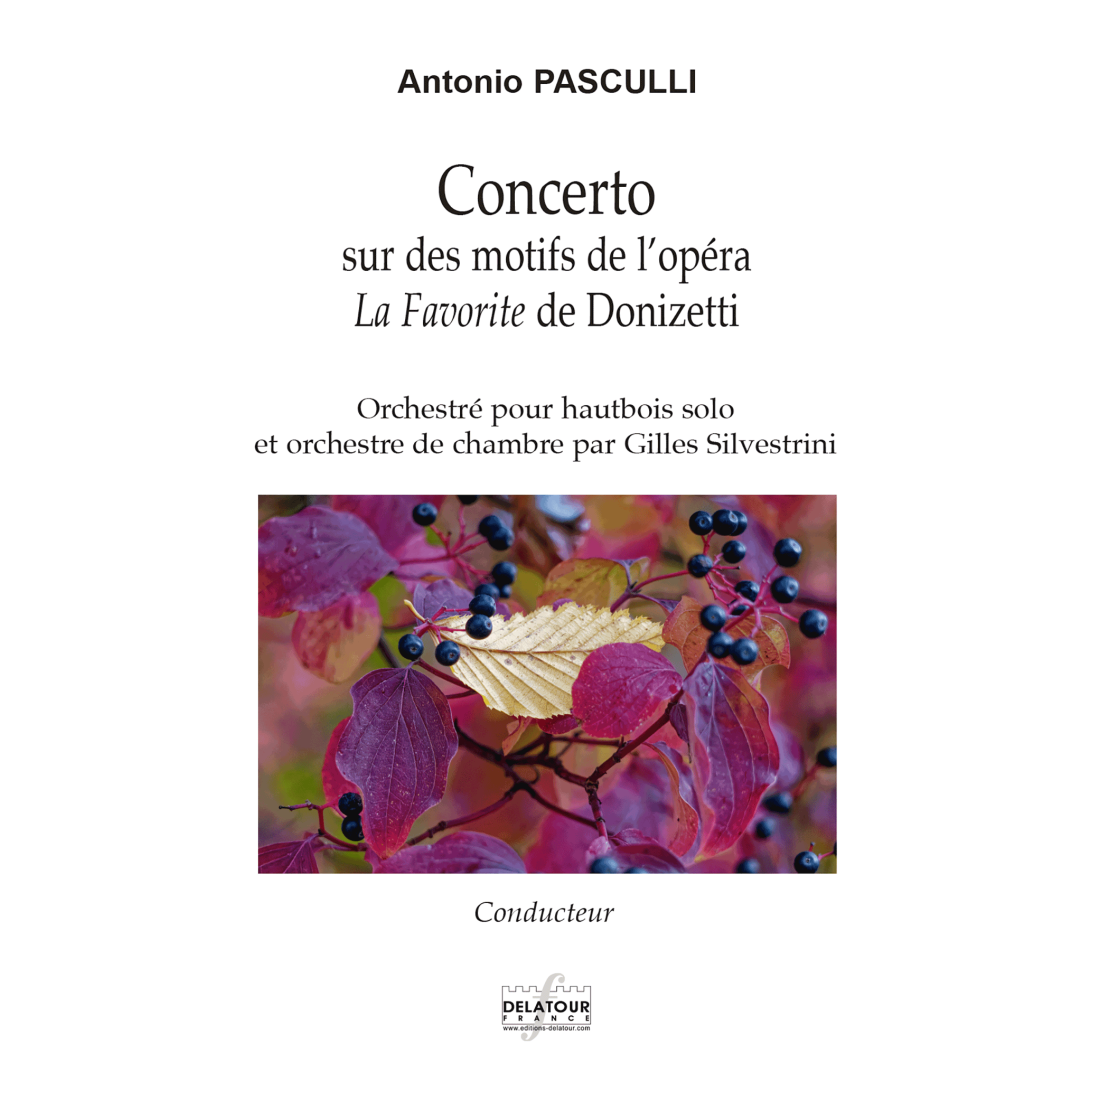 Concerto on motifs from the opera La...